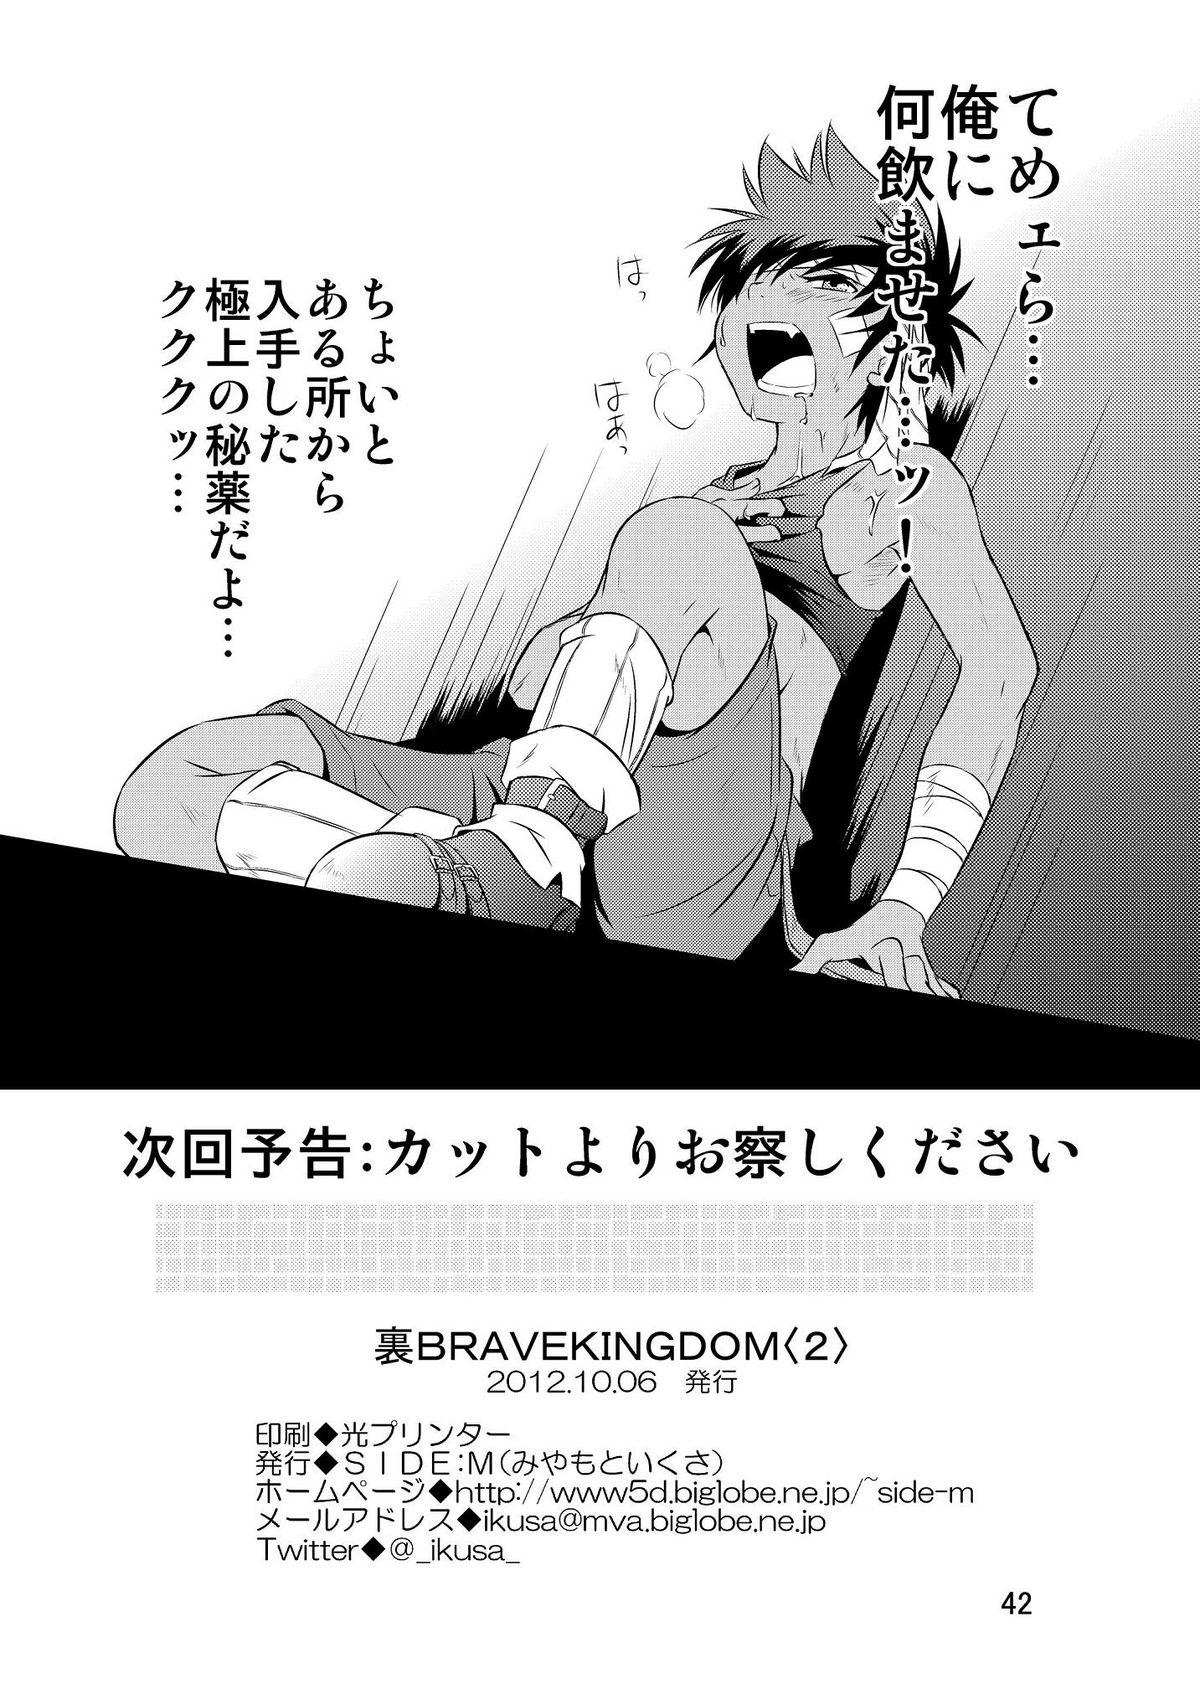 Action Ura Brave Kingdom 2 Ass To Mouth - Page 41